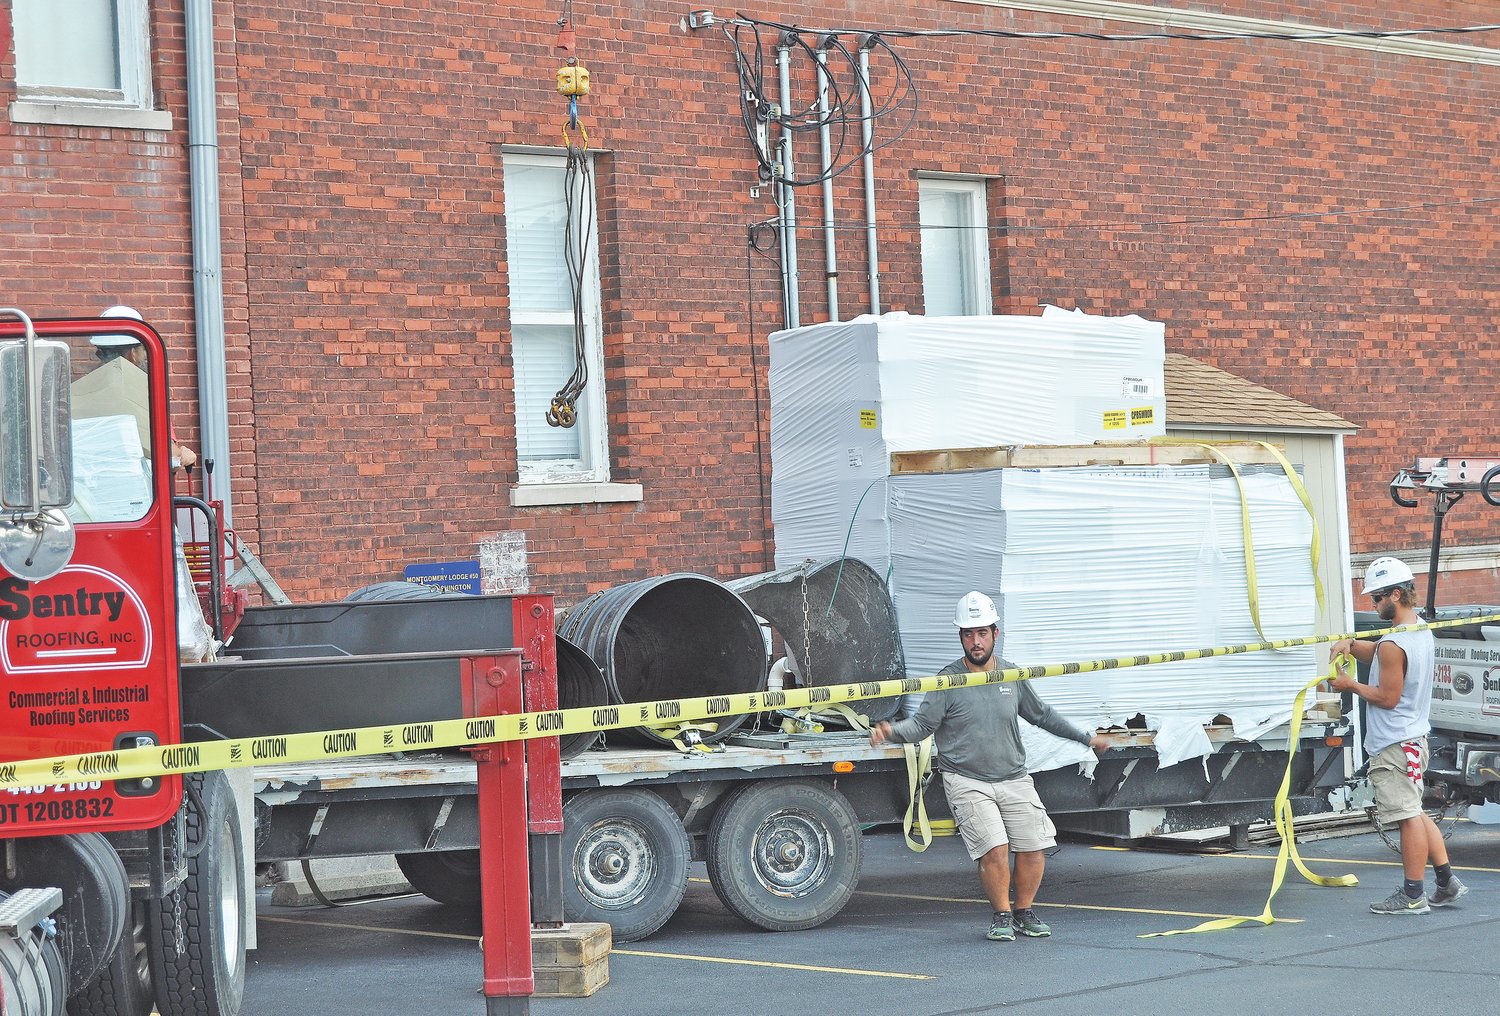 Workers from Sentry Roofing prepare to hoist supplies onto the roof of the Masonic Cornerstone Grand Hall & Event Center on Monday. The crews were beginning the process of replacing the roof of the historic downtown structure.